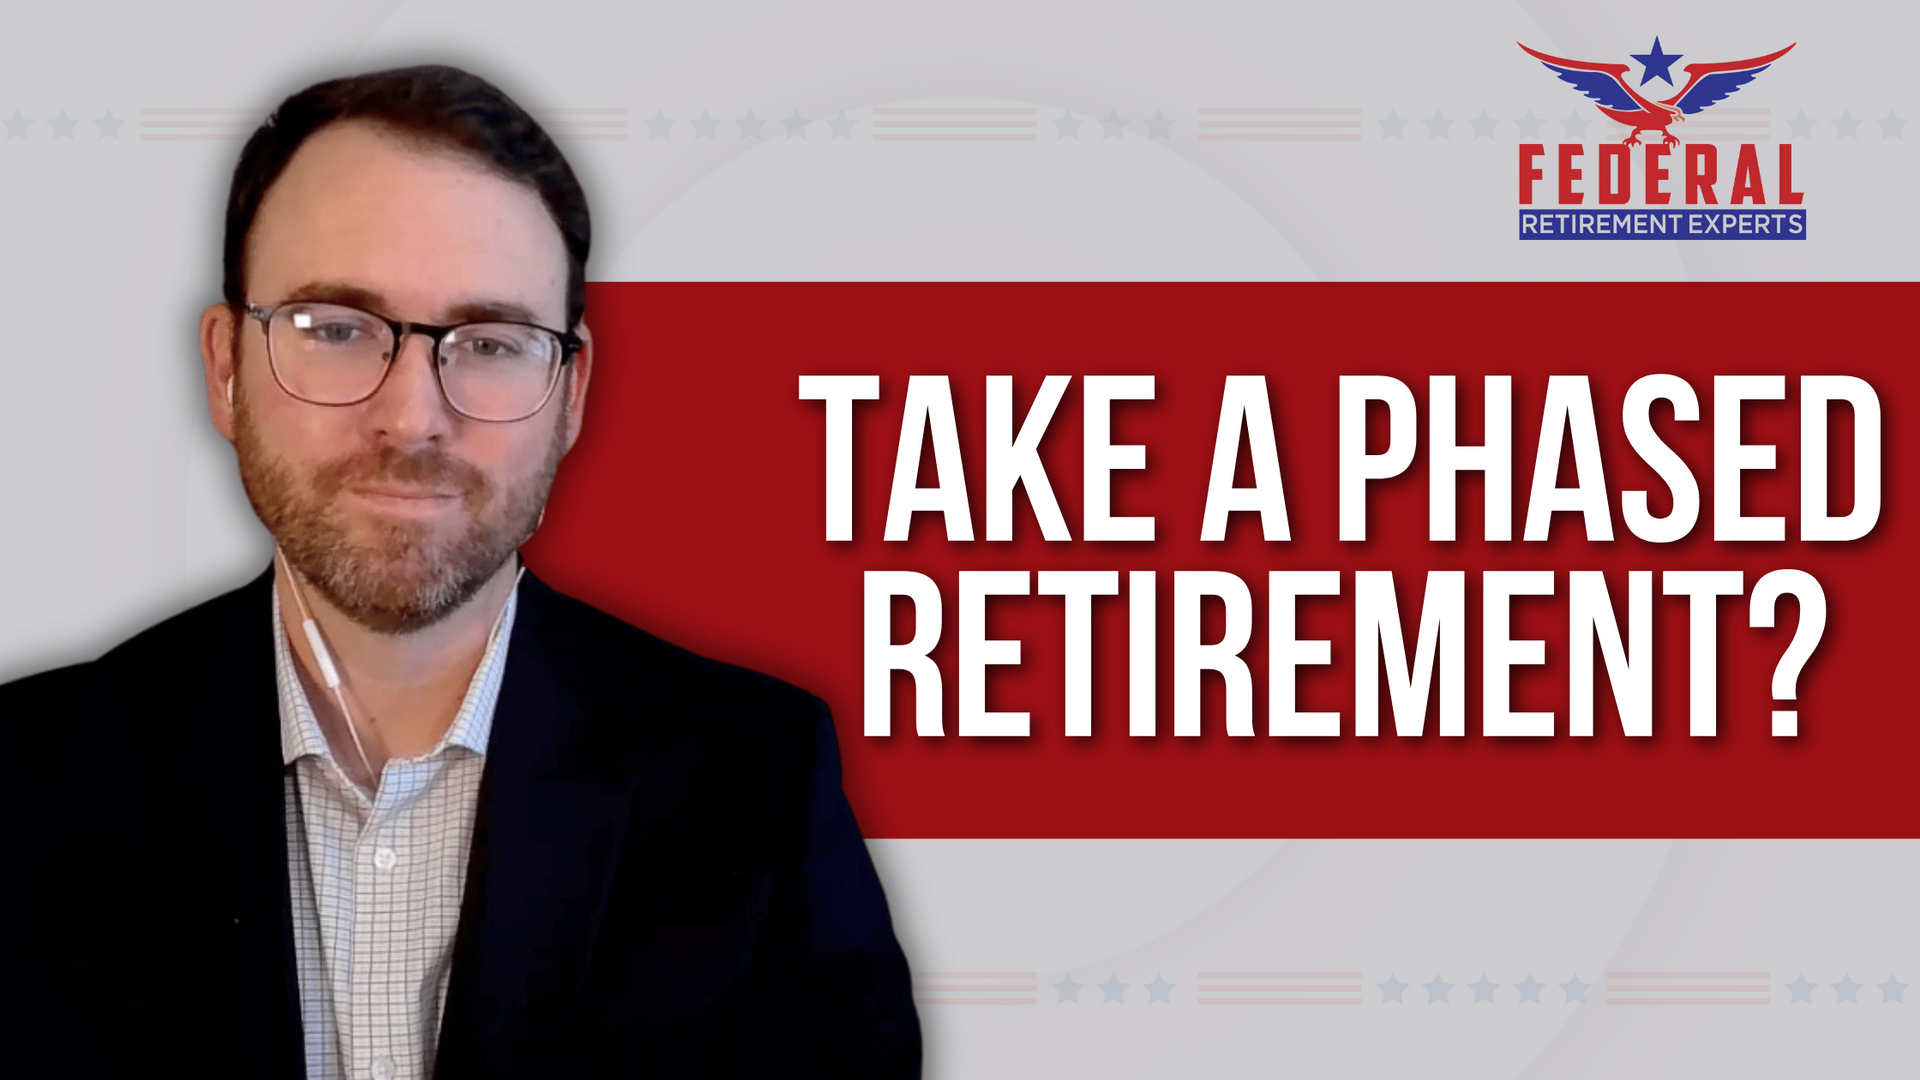 Phased Retirement for Federal Employees?